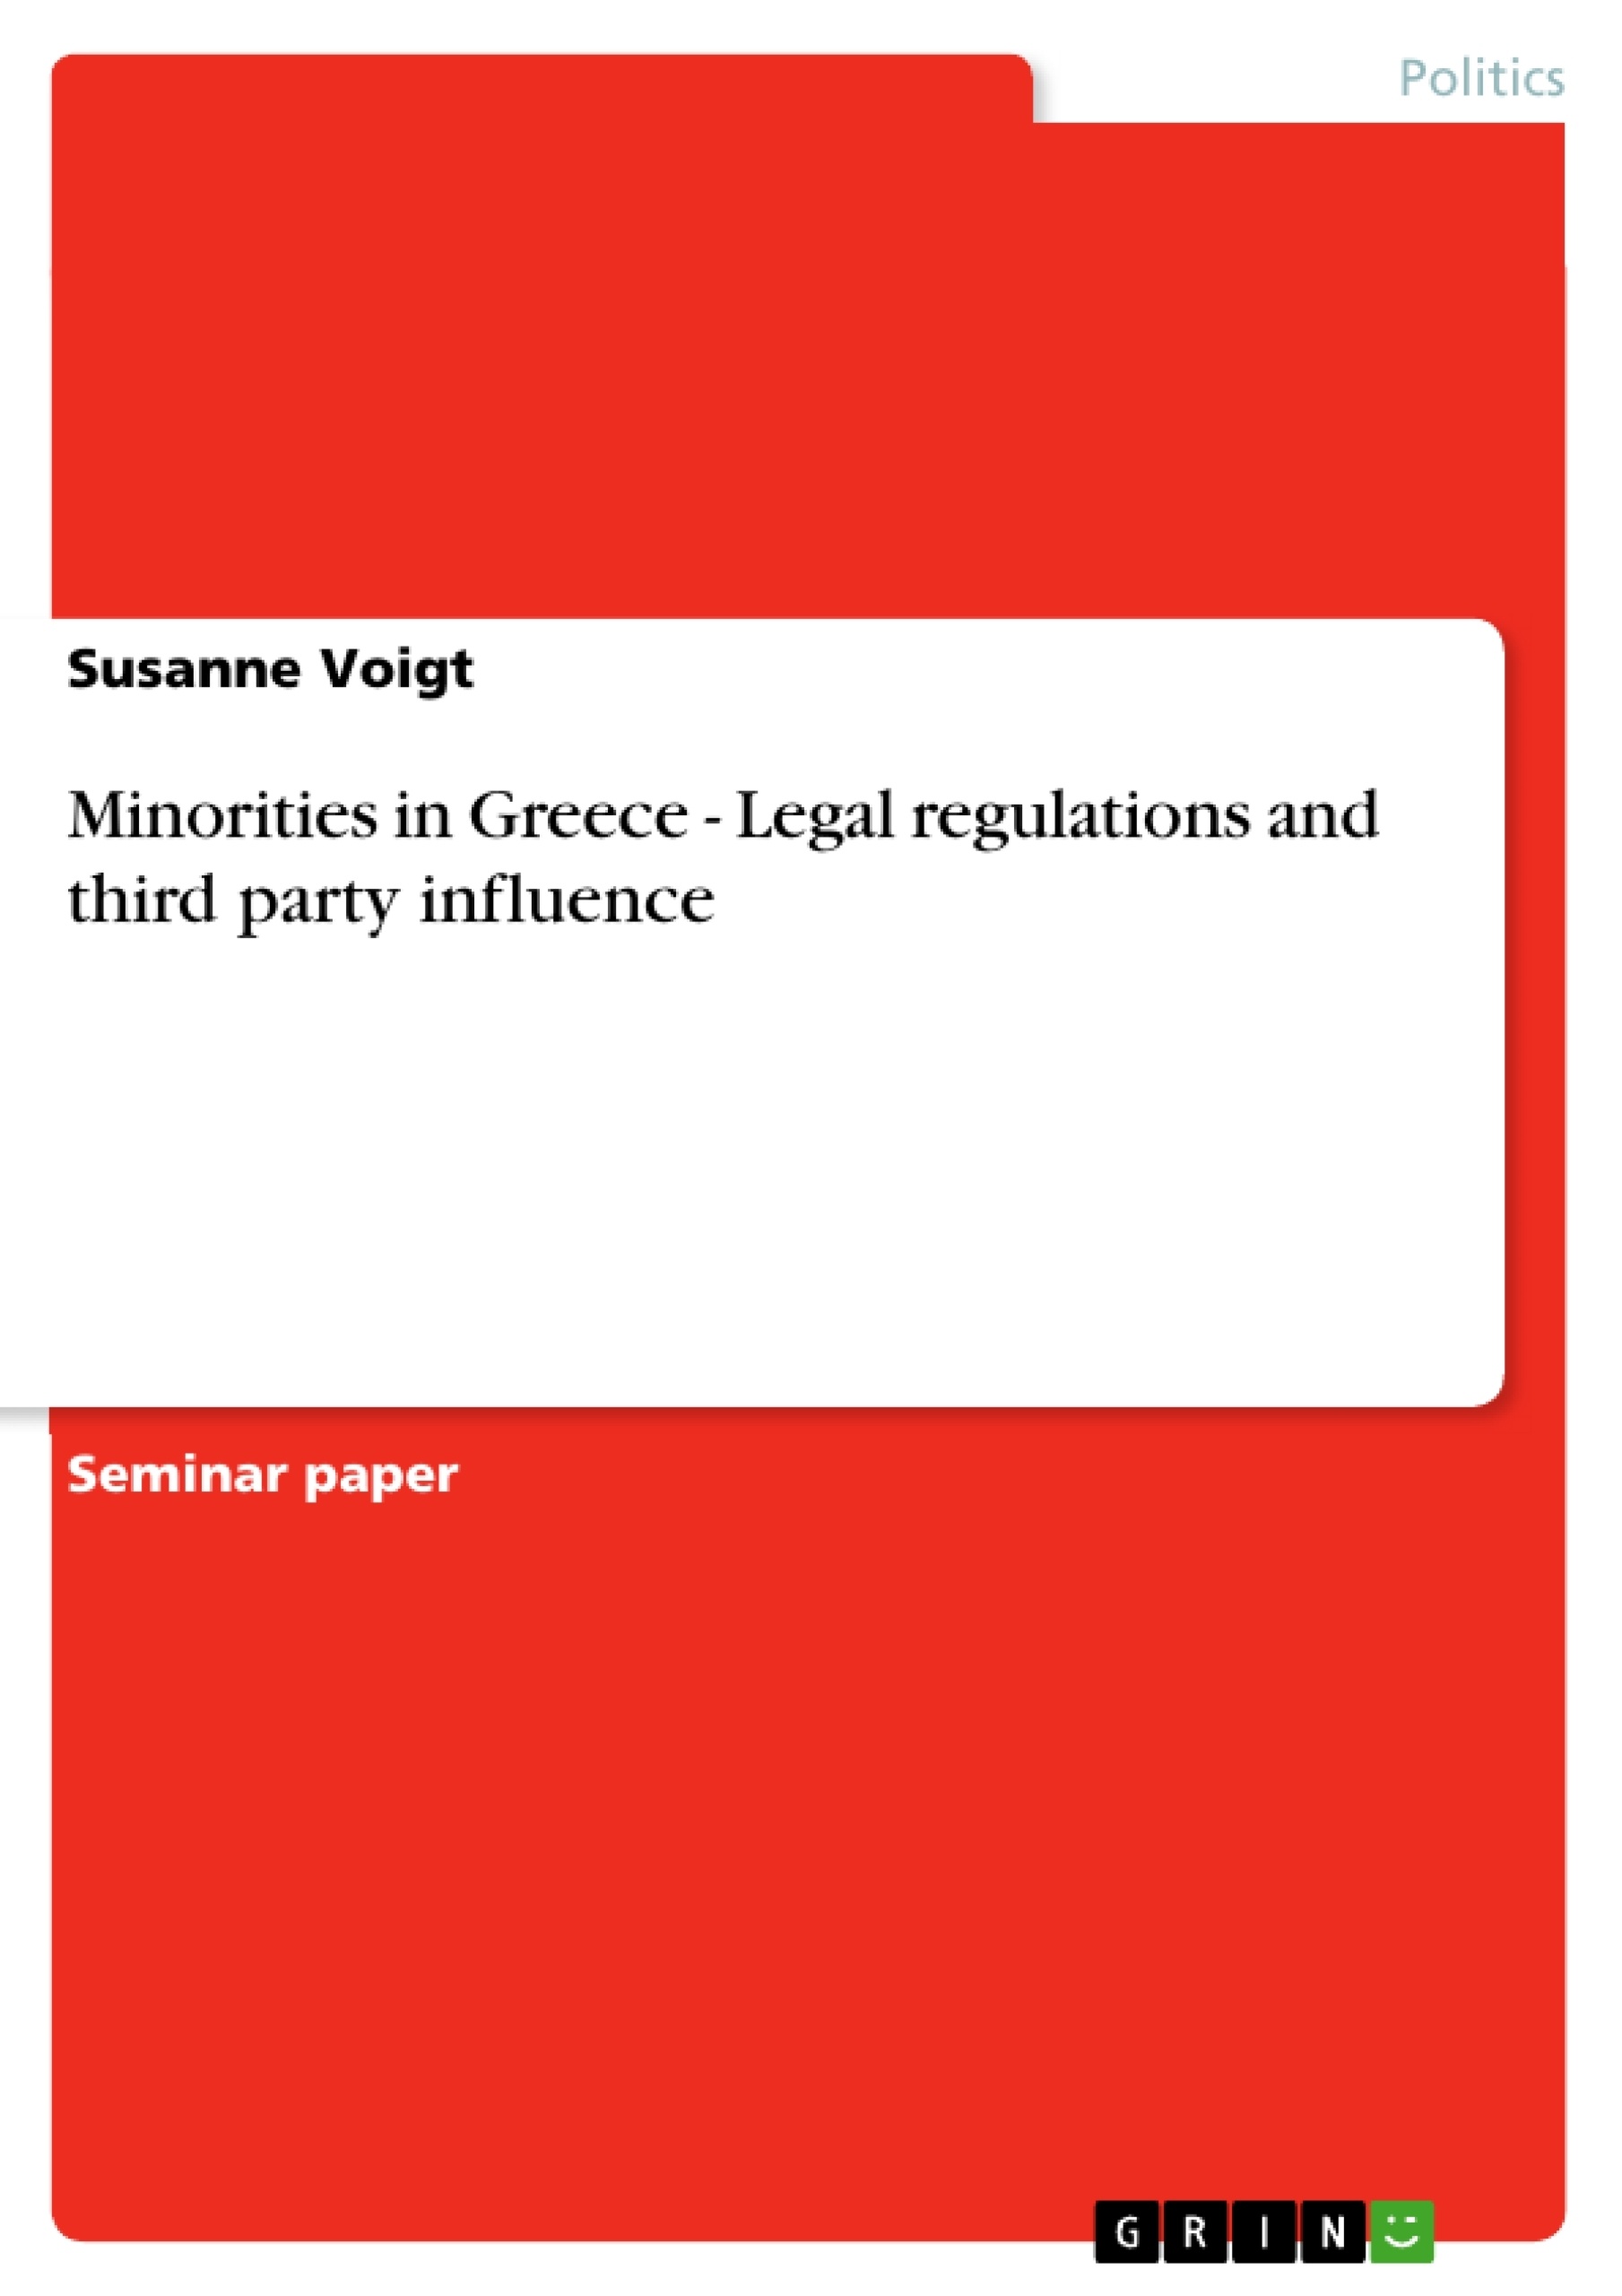 Título: Minorities in Greece - Legal regulations and third party influence	